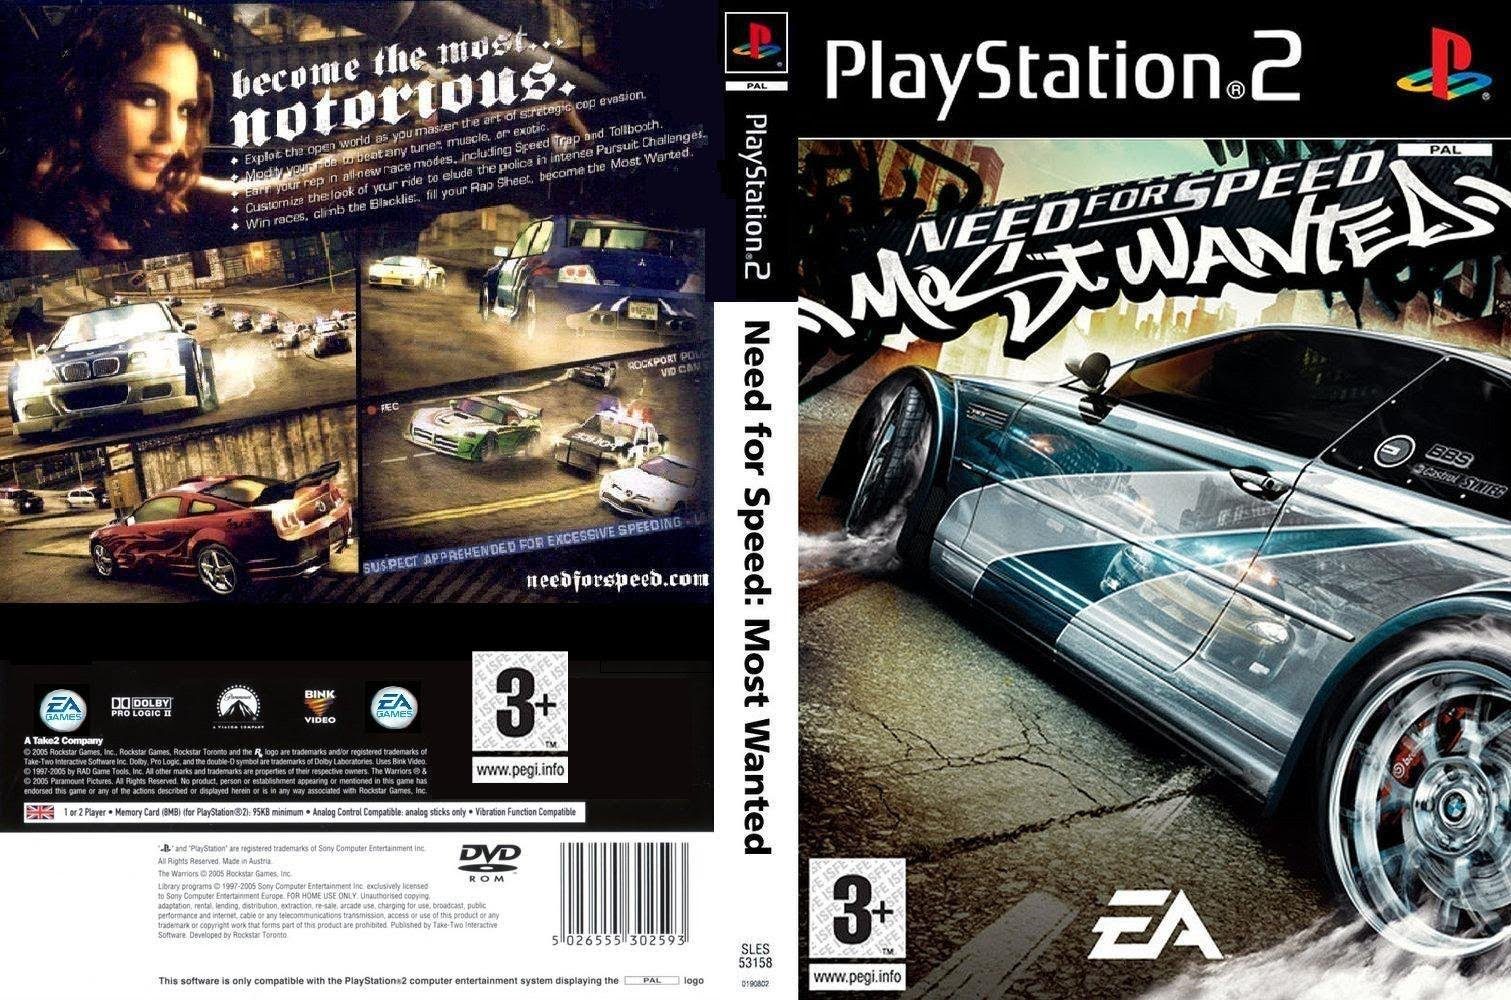 Need for Speed Most Wanted 2005: Paramount logo on UK version cover